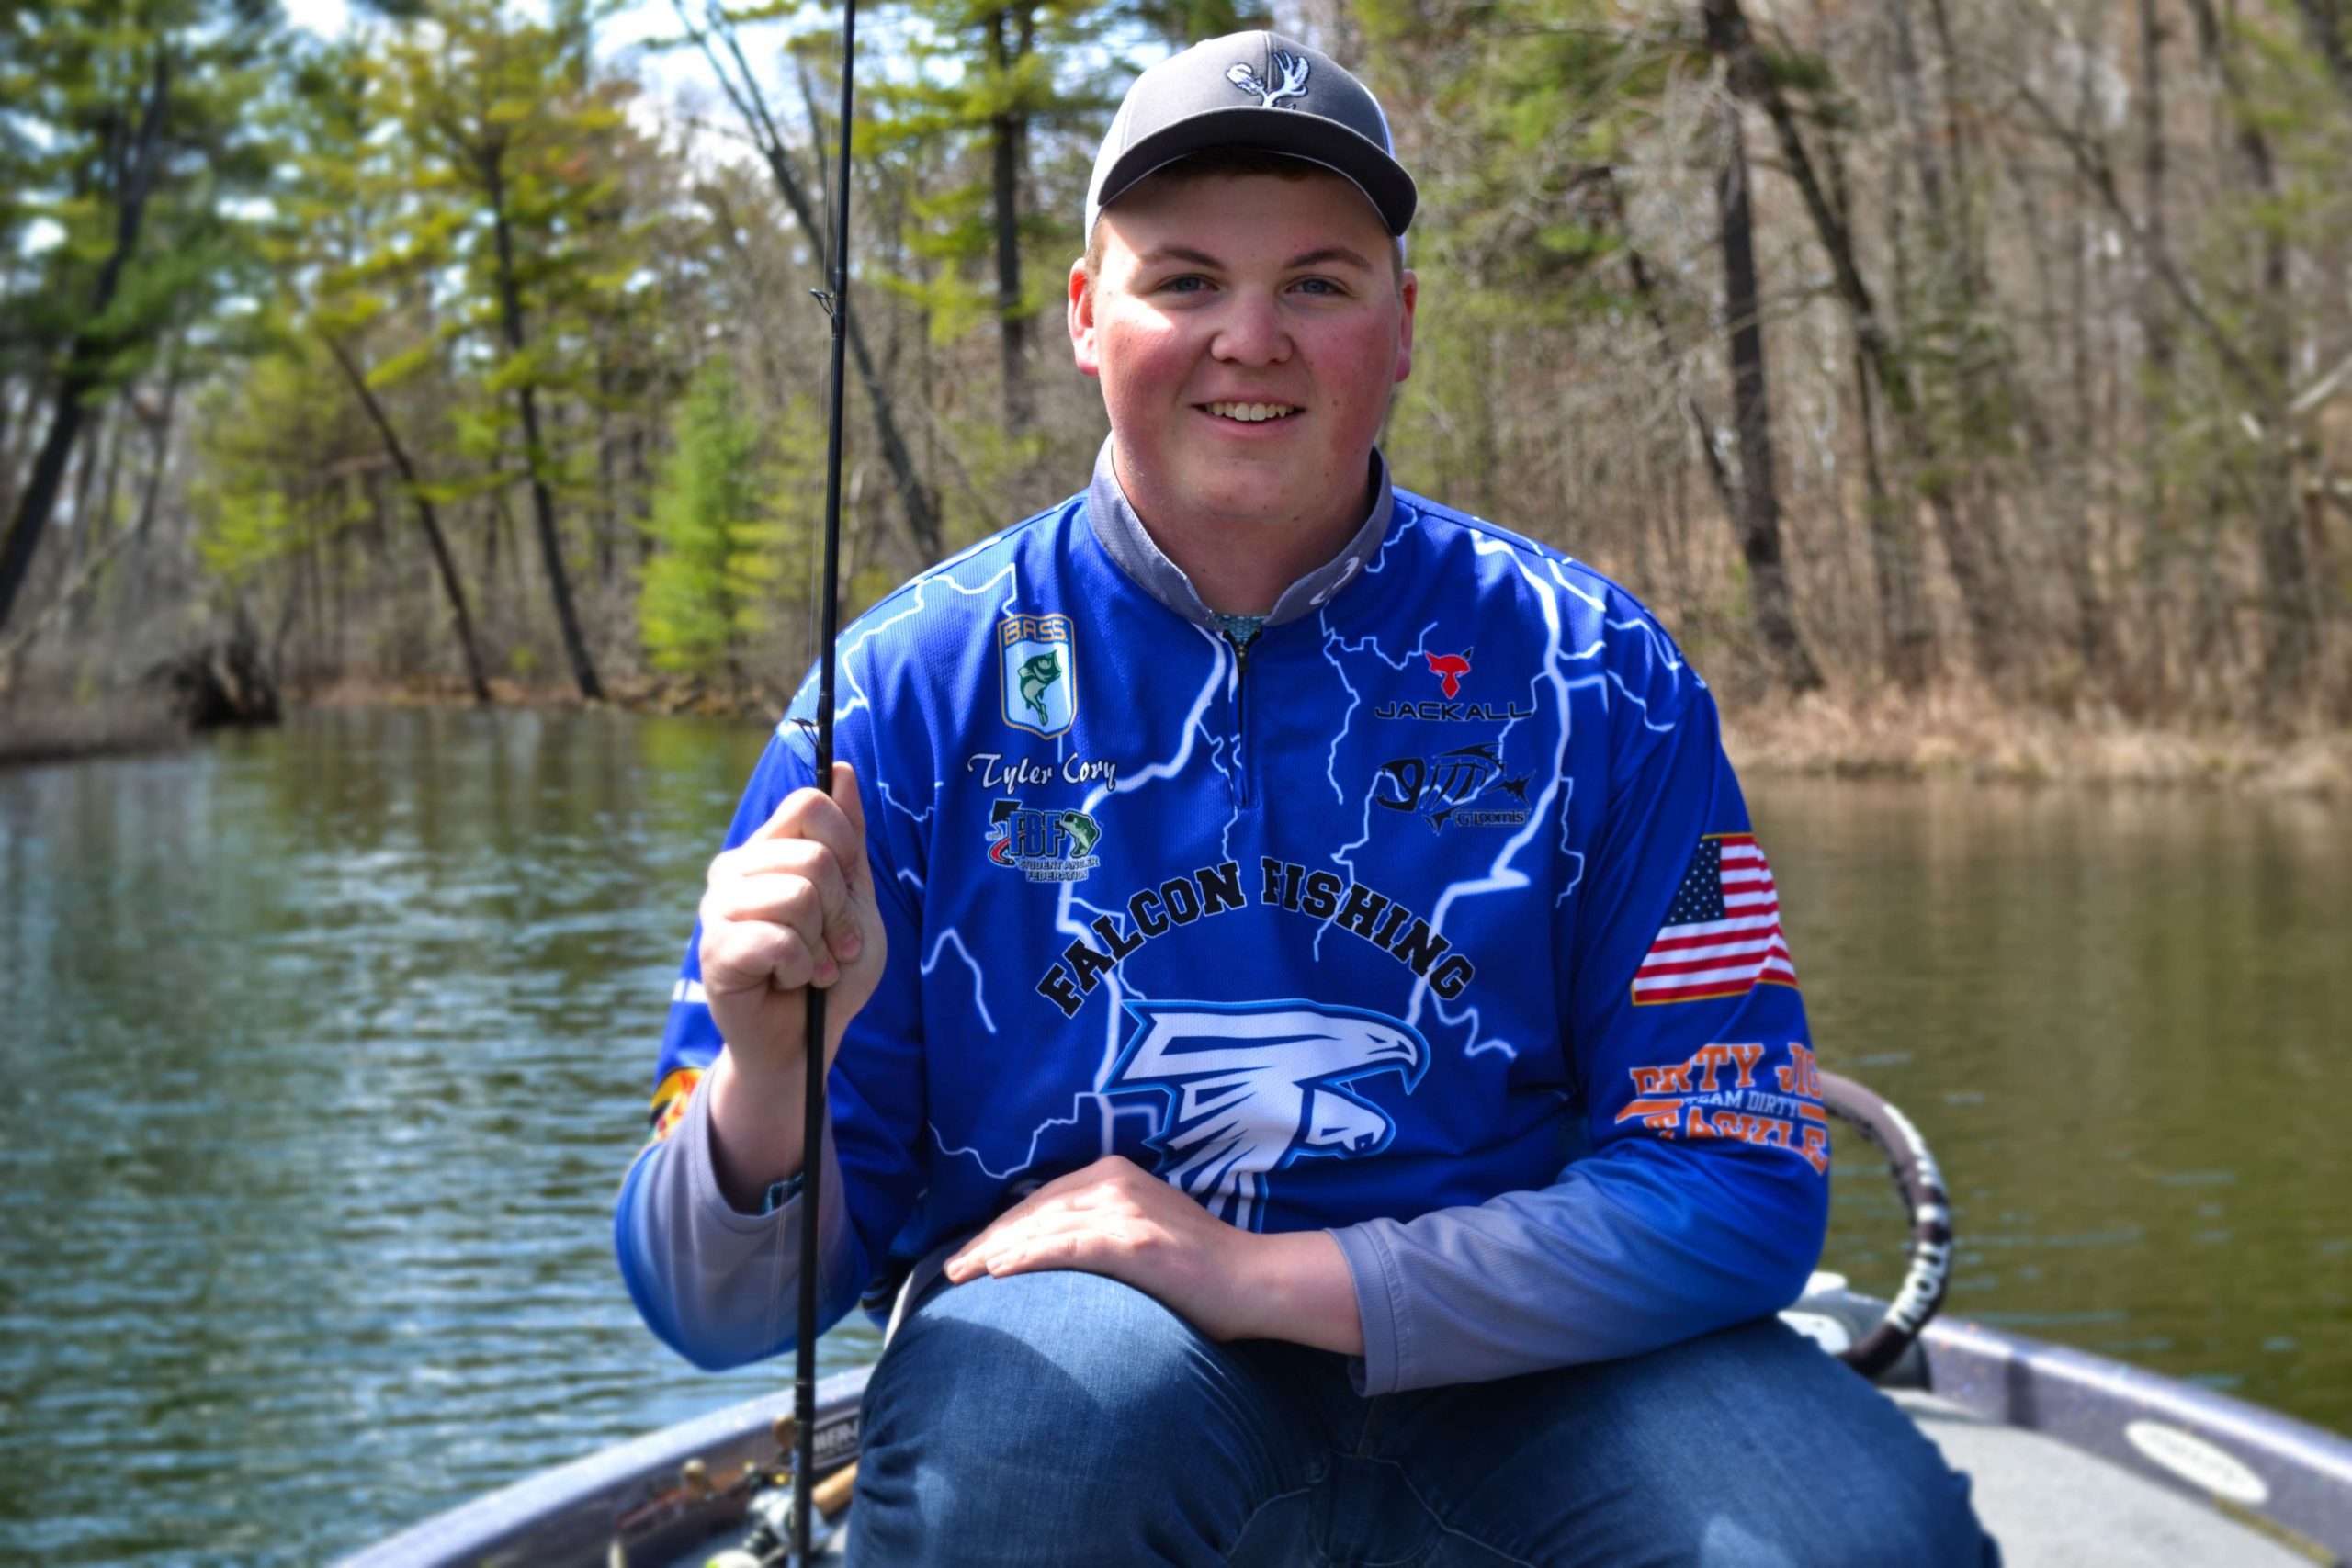 <b>Tyler Cory, Amherst, Wis. </b><br> Being named a back-to-back Bassmaster High School All-American is not an easy feat, but with an impressive five tournament wins, 11 Top 5 finishes and one Top 20 finish, Cory, a senior at Amherst High School, has done just that. Last year, Cory was named the first ever Bassmaster High School All-American from the state of Wisconsin, and this year he is gladly bringing that title home once again.  <p> Cory serves as an instrumental member of the community where he volunteers for the Boys and Girls Club, Teach a Child to Fish and Future Business Leaders of America. He is also the founder and president of the Amherst High School Fishing Club.  <p> âHe has an incredible work ethic in and out of the classroom,â said Amherst High School Social Studies Teacher, Jason Pickering. âMr. Cory has participated in FBLA, Investment Club, Fishing Club (president), Finance and Investment Challenge Bowl and the Salvation Army. Despite all of these demands, Tyler has consistently made the honor roll while being employed since his sophomore year. Tyler is a people person who can succeed in any environment and has a wonderful sense of humor and personality that makes him a delight to be around.â 